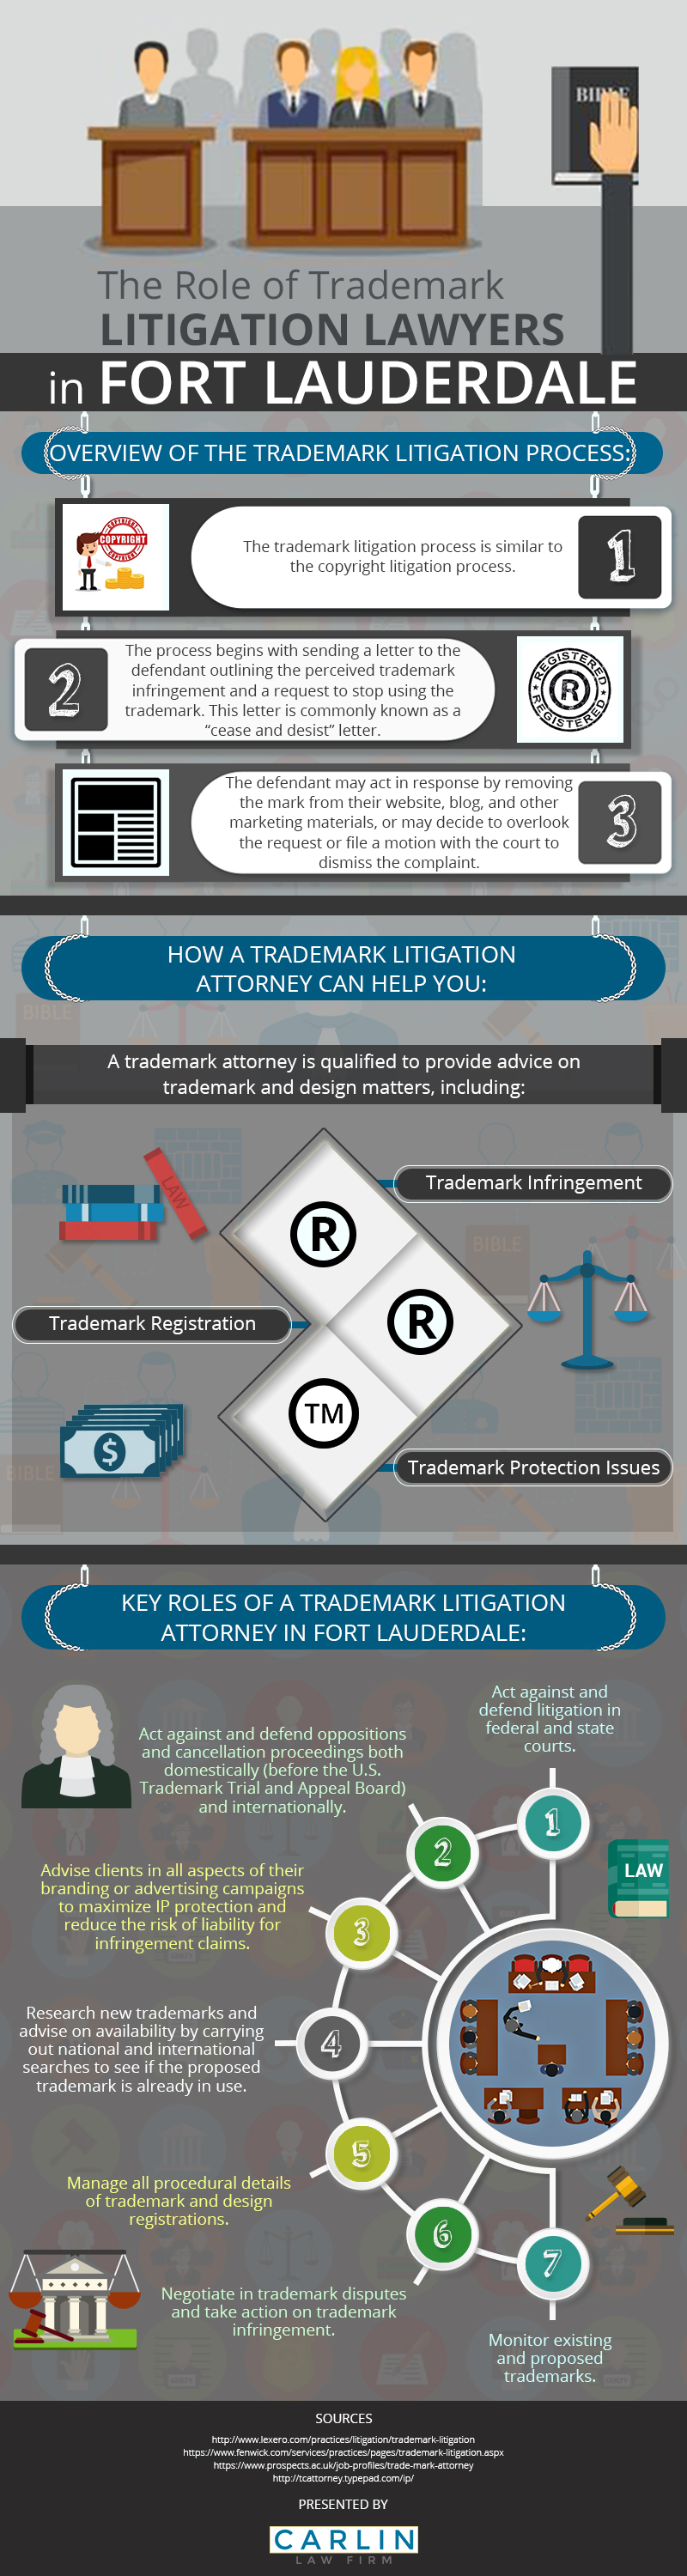 Things You Must Know About the Trademark Litigation Process